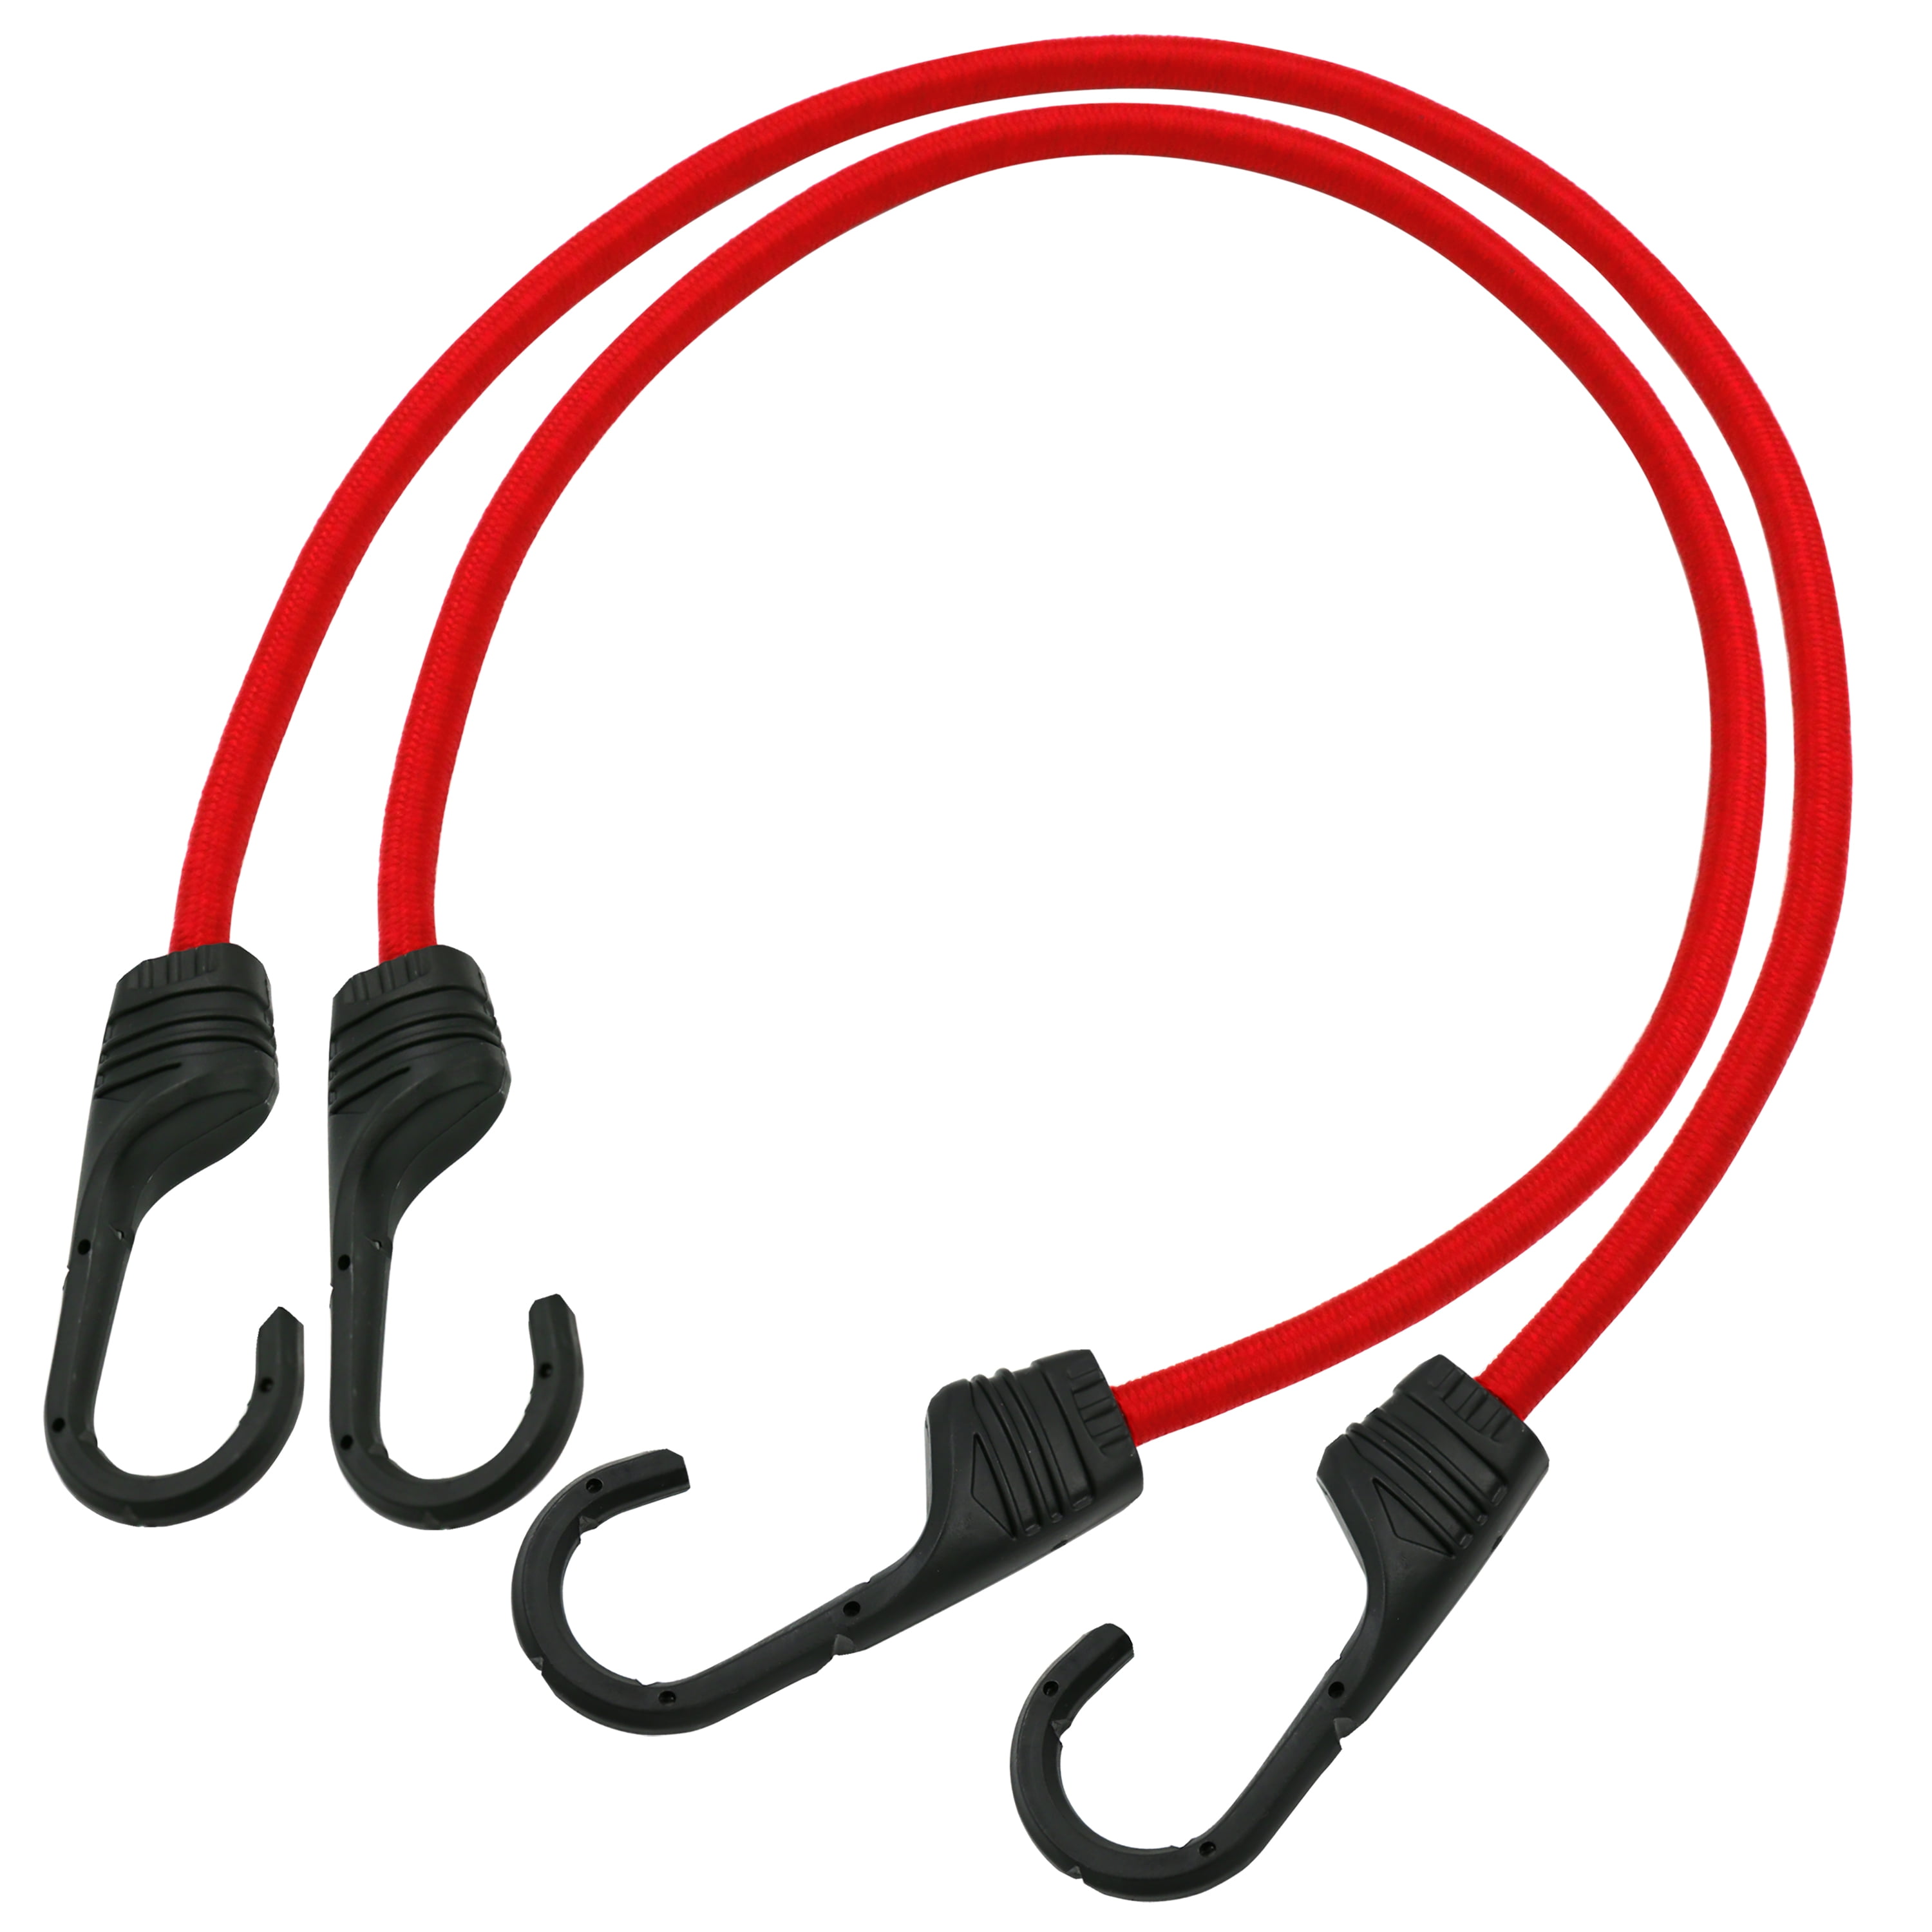 Hyper Tough 2 Pack 24 inch Standard Bungee Cords, Rubber, Red, 0.3